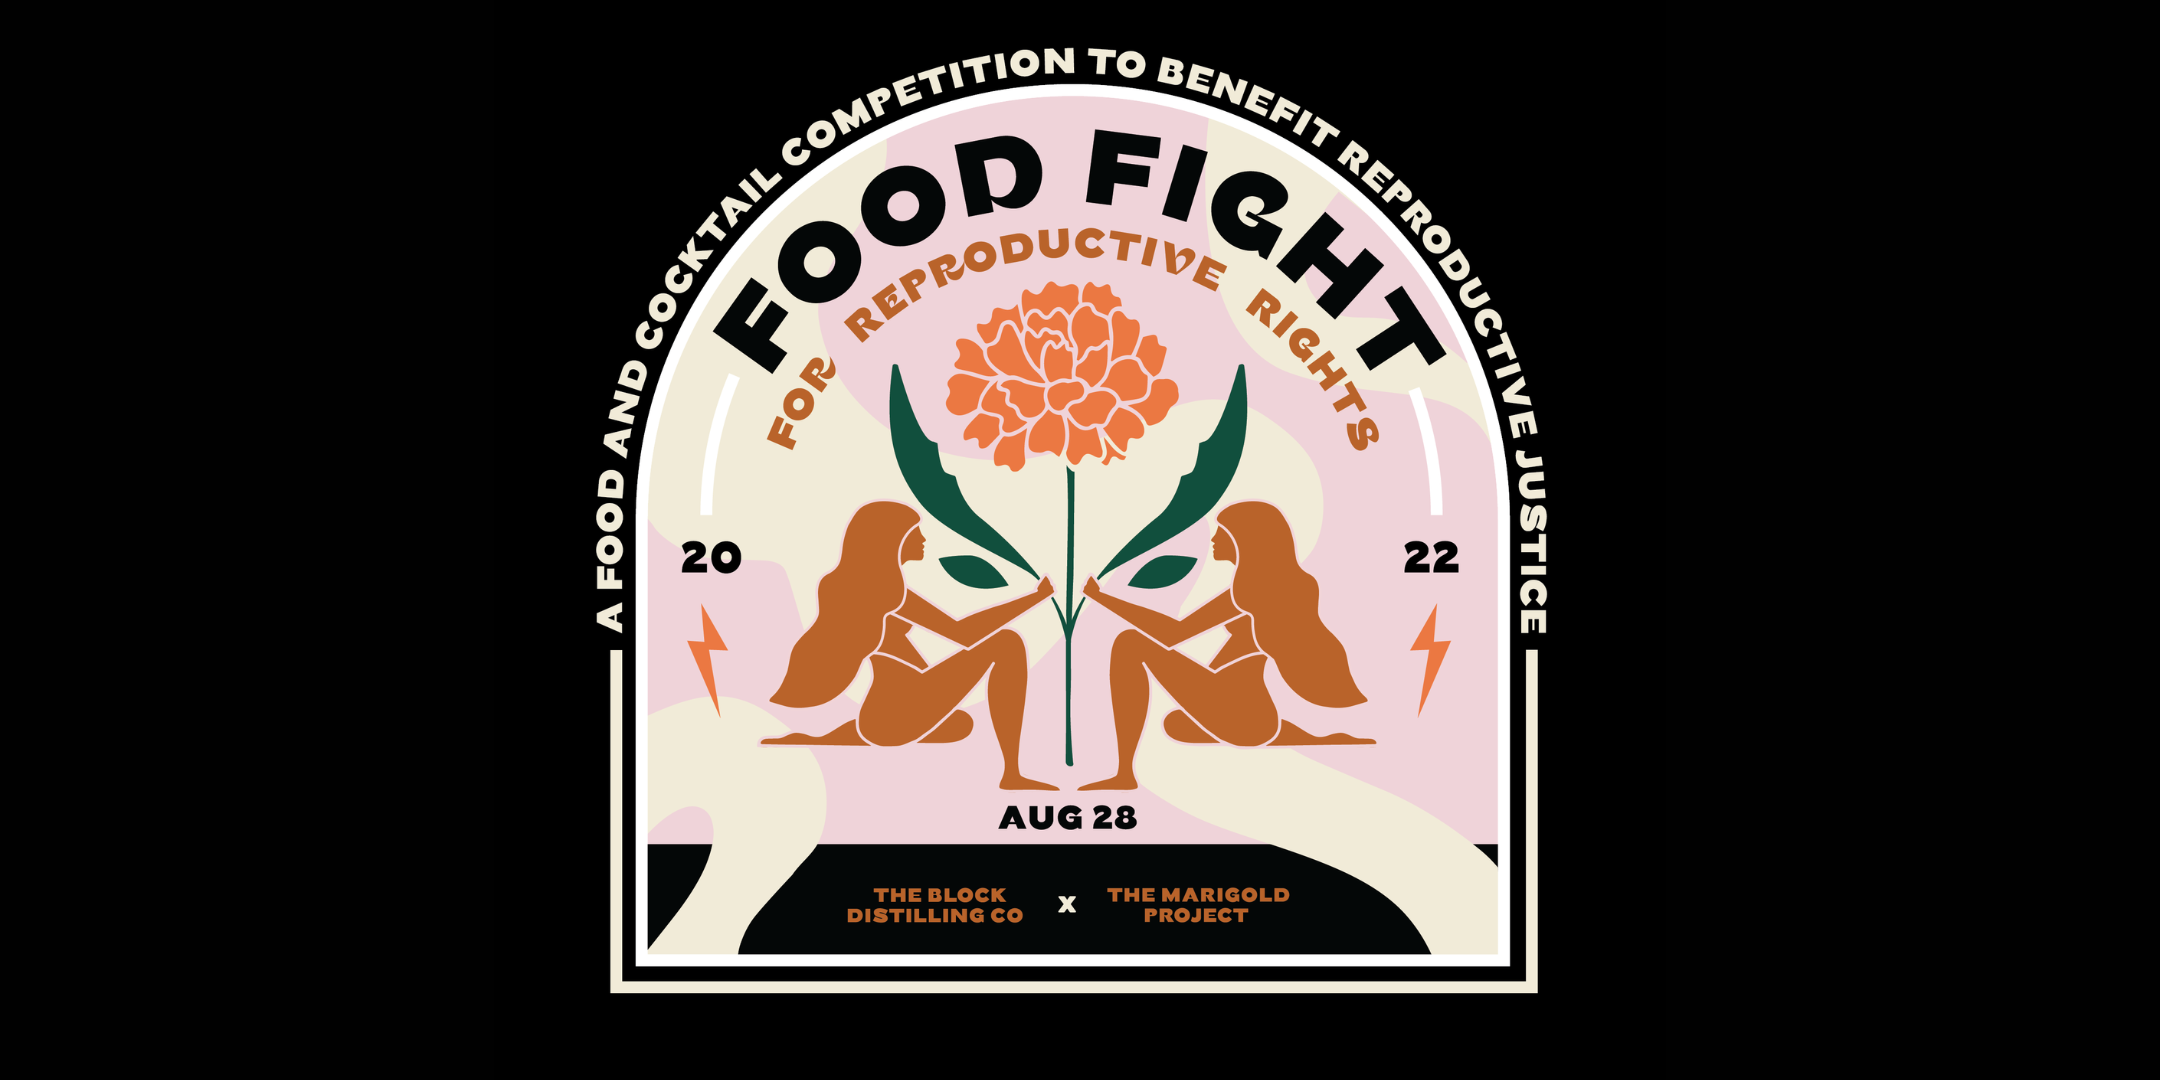 Food Fight for Reproductive Rights at The Block Distilling Co.